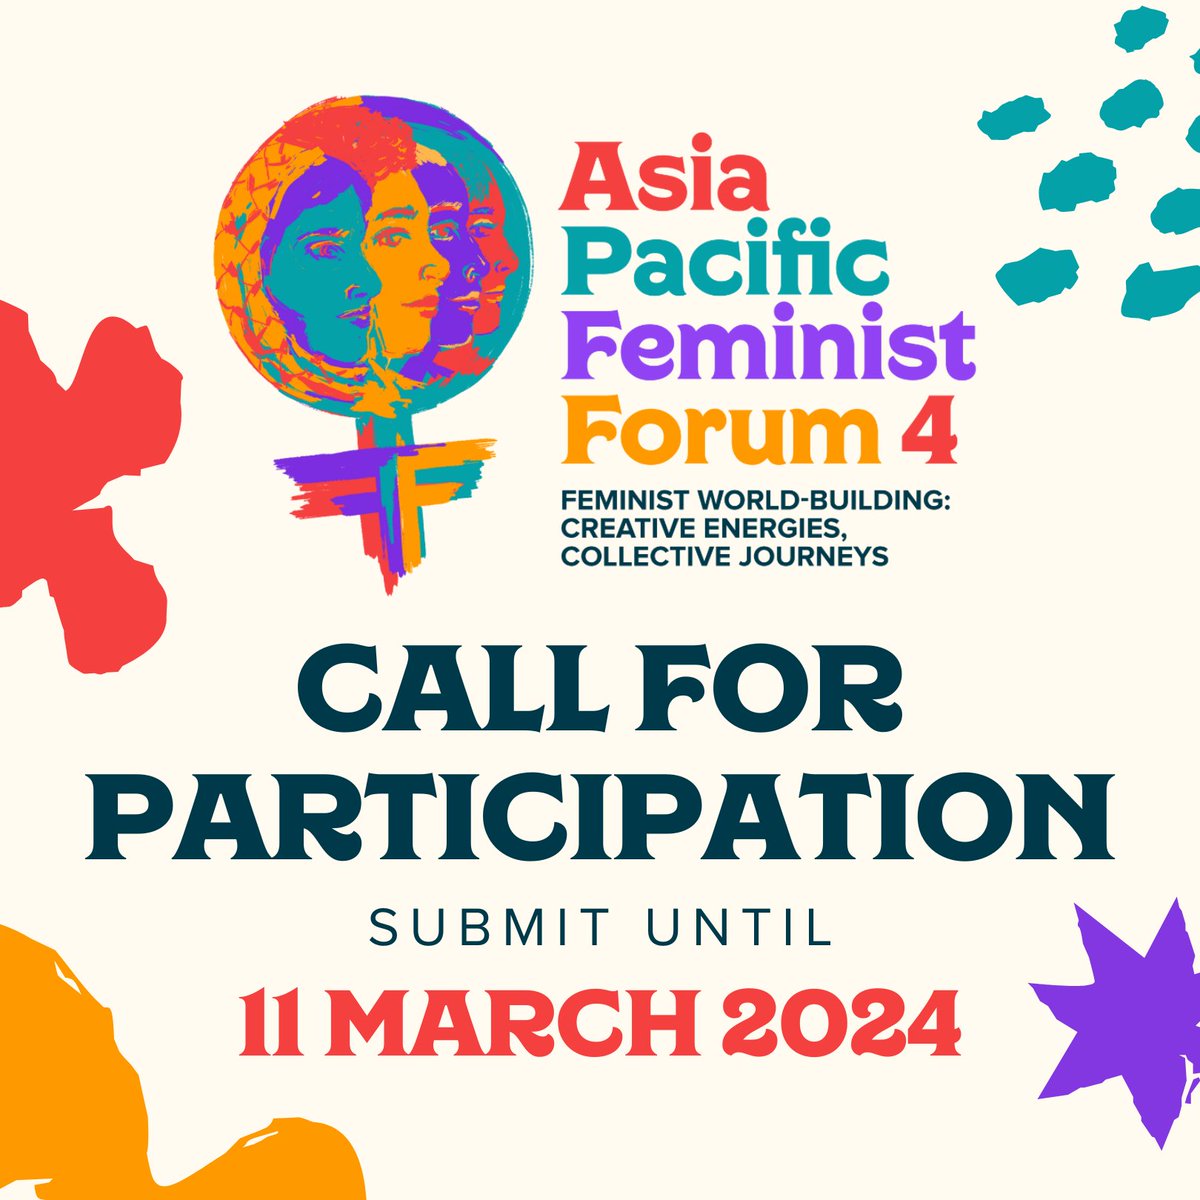 ✨ Call for Participation for the 4th Asia Pacific Feminist Forum (APFF4) is NOW OPEN! ✨ 📍For more details, visit: apwld.org ✊Apply here: bit.ly/APFF4Registrat… #APFF4 #FeministWorldBuilding